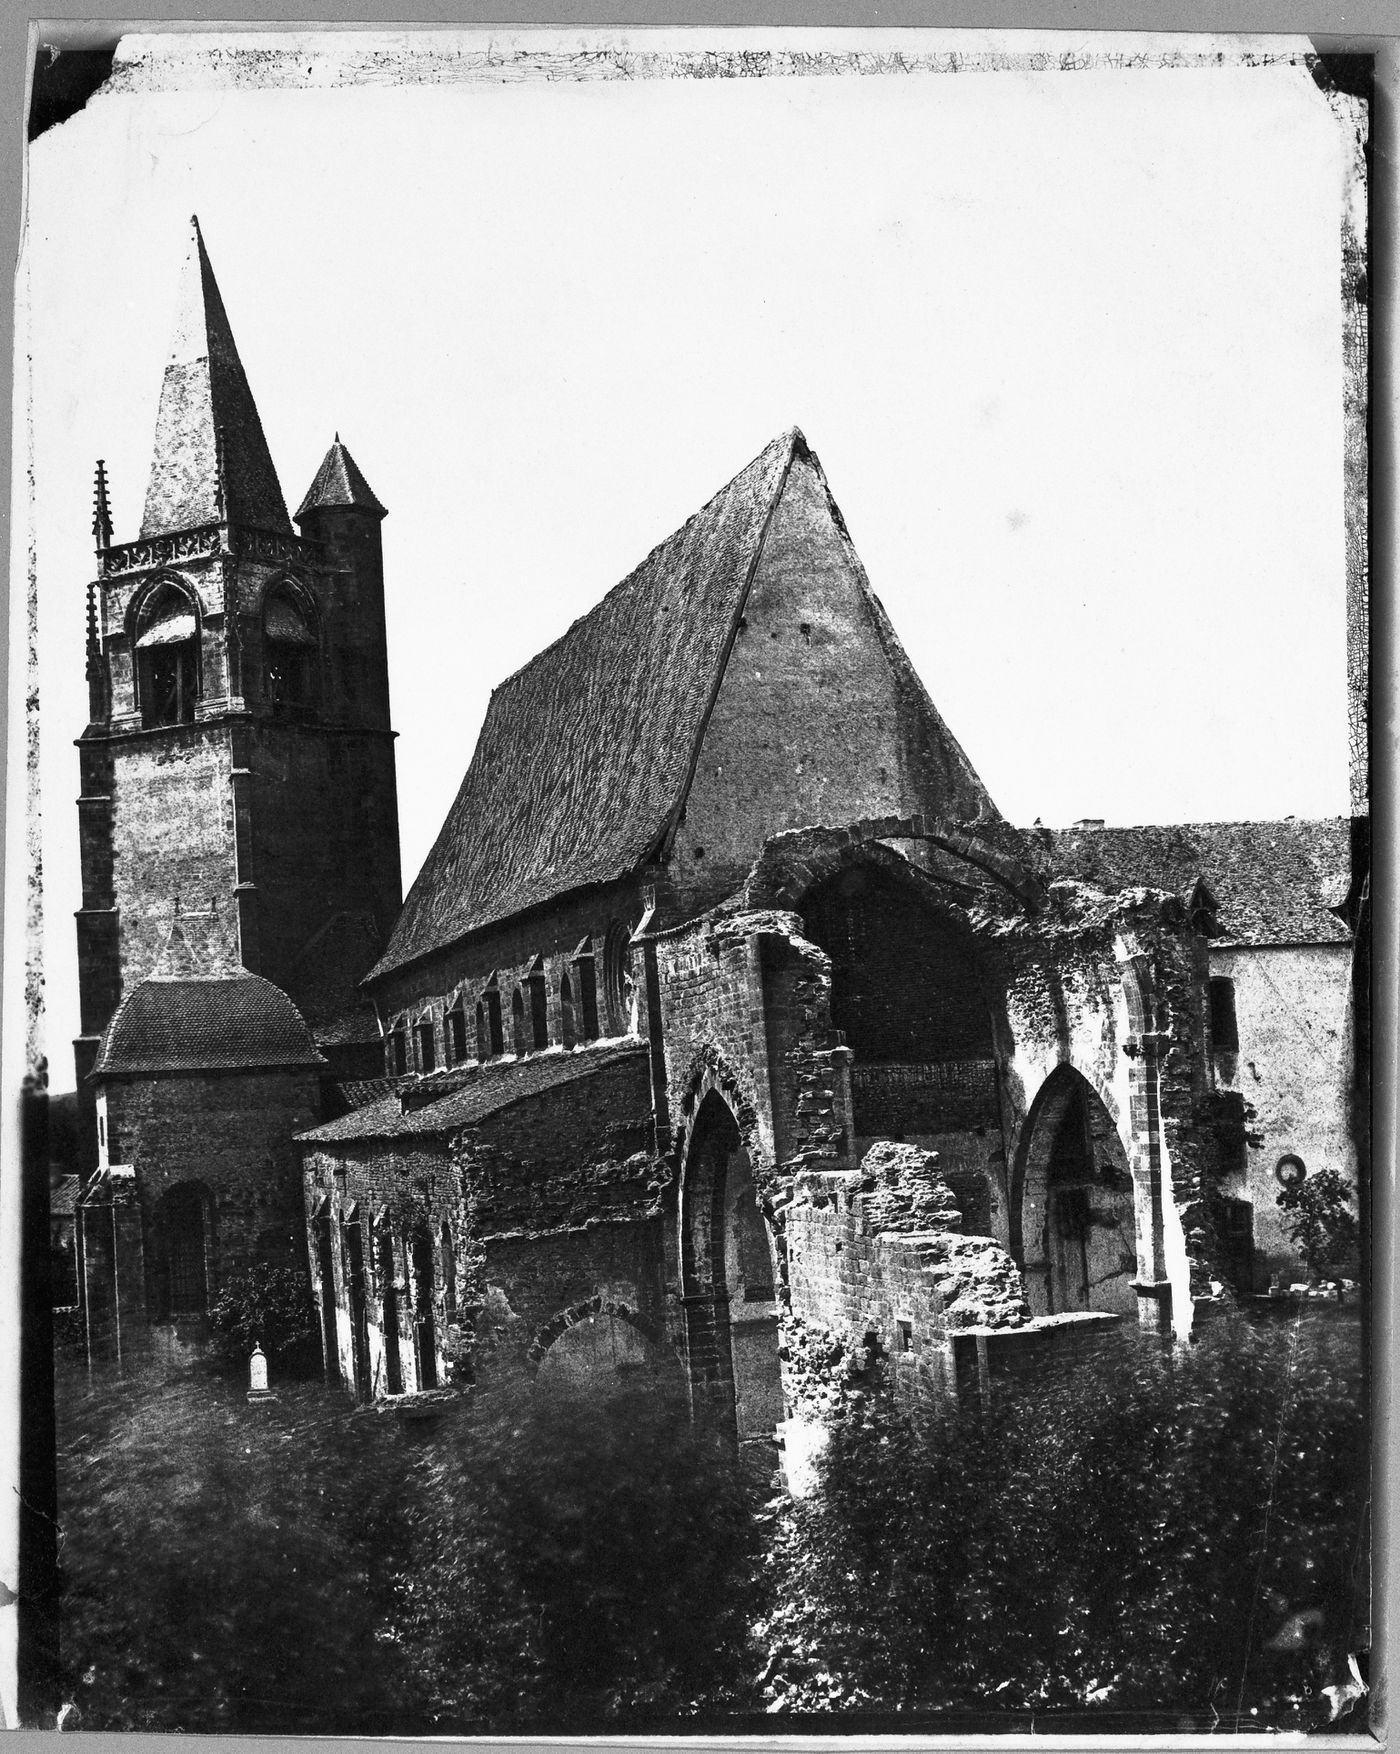 View of Church with ruined wall in foreground, Roanne, France